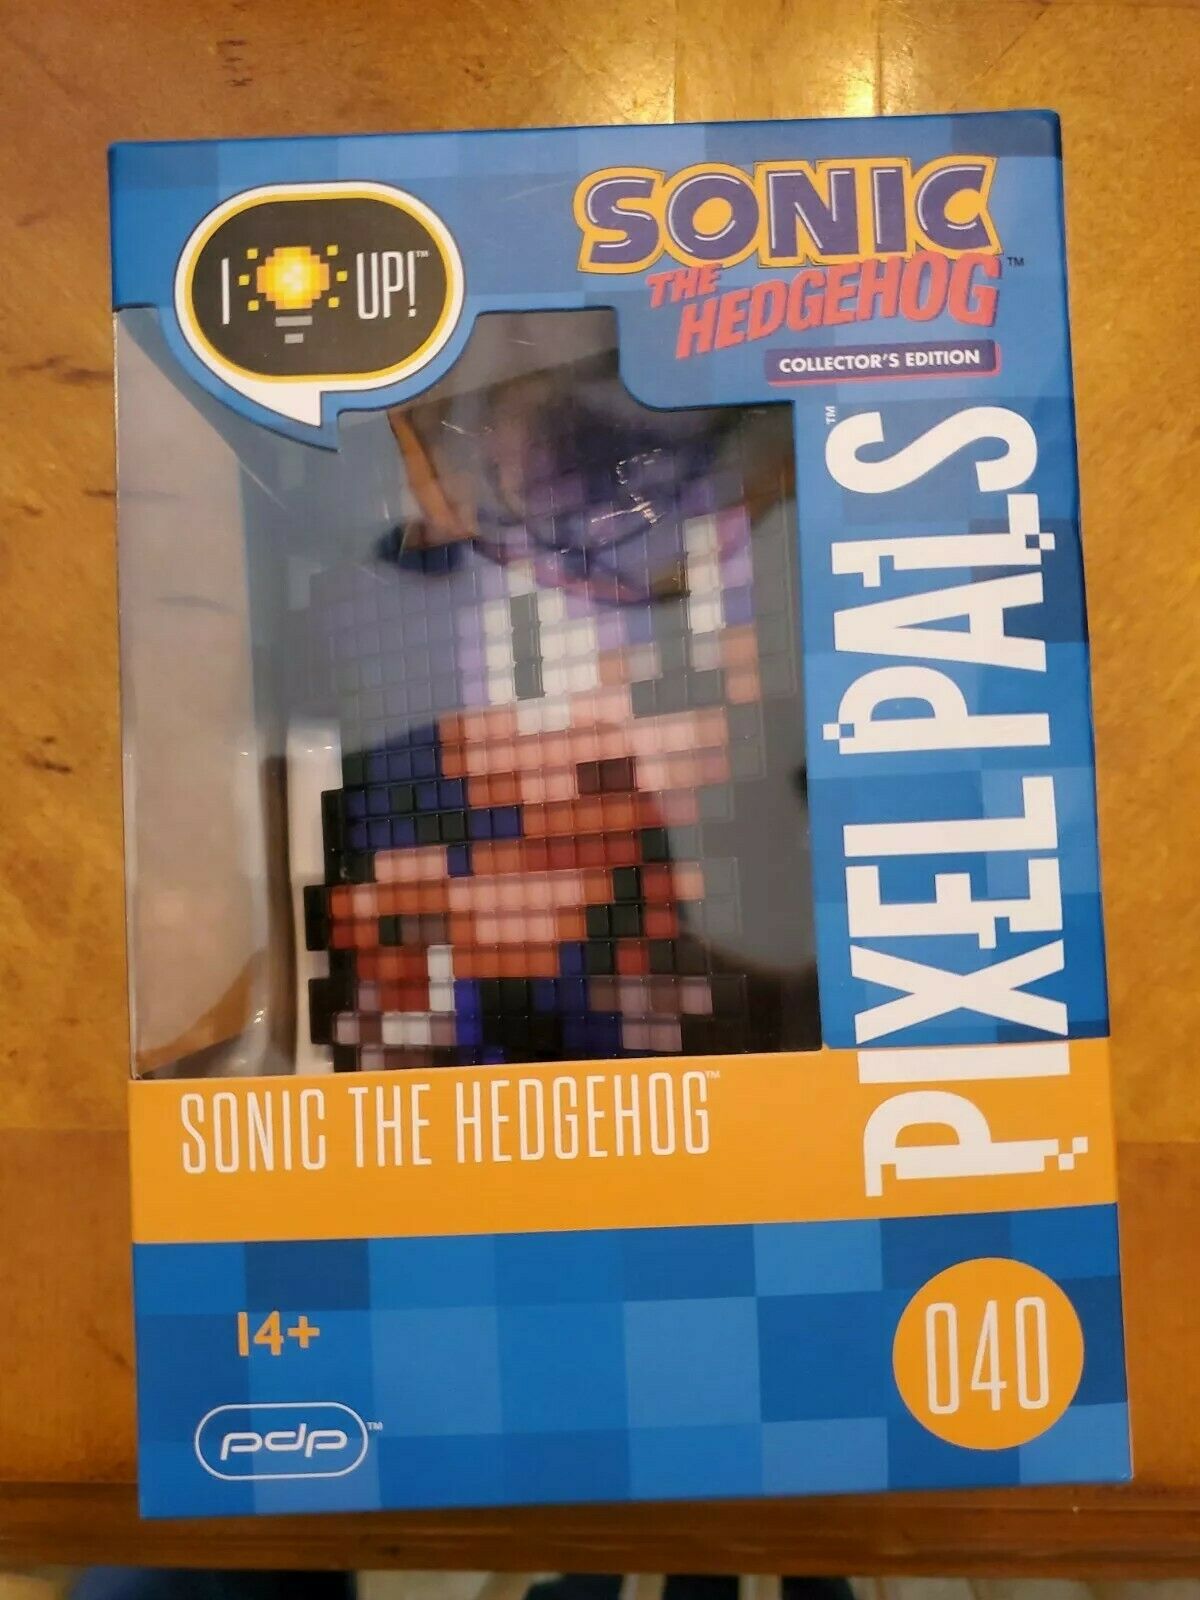 PDP Pixel Pals 040 Sonic the Hedgehog Collector's Edition Sonic